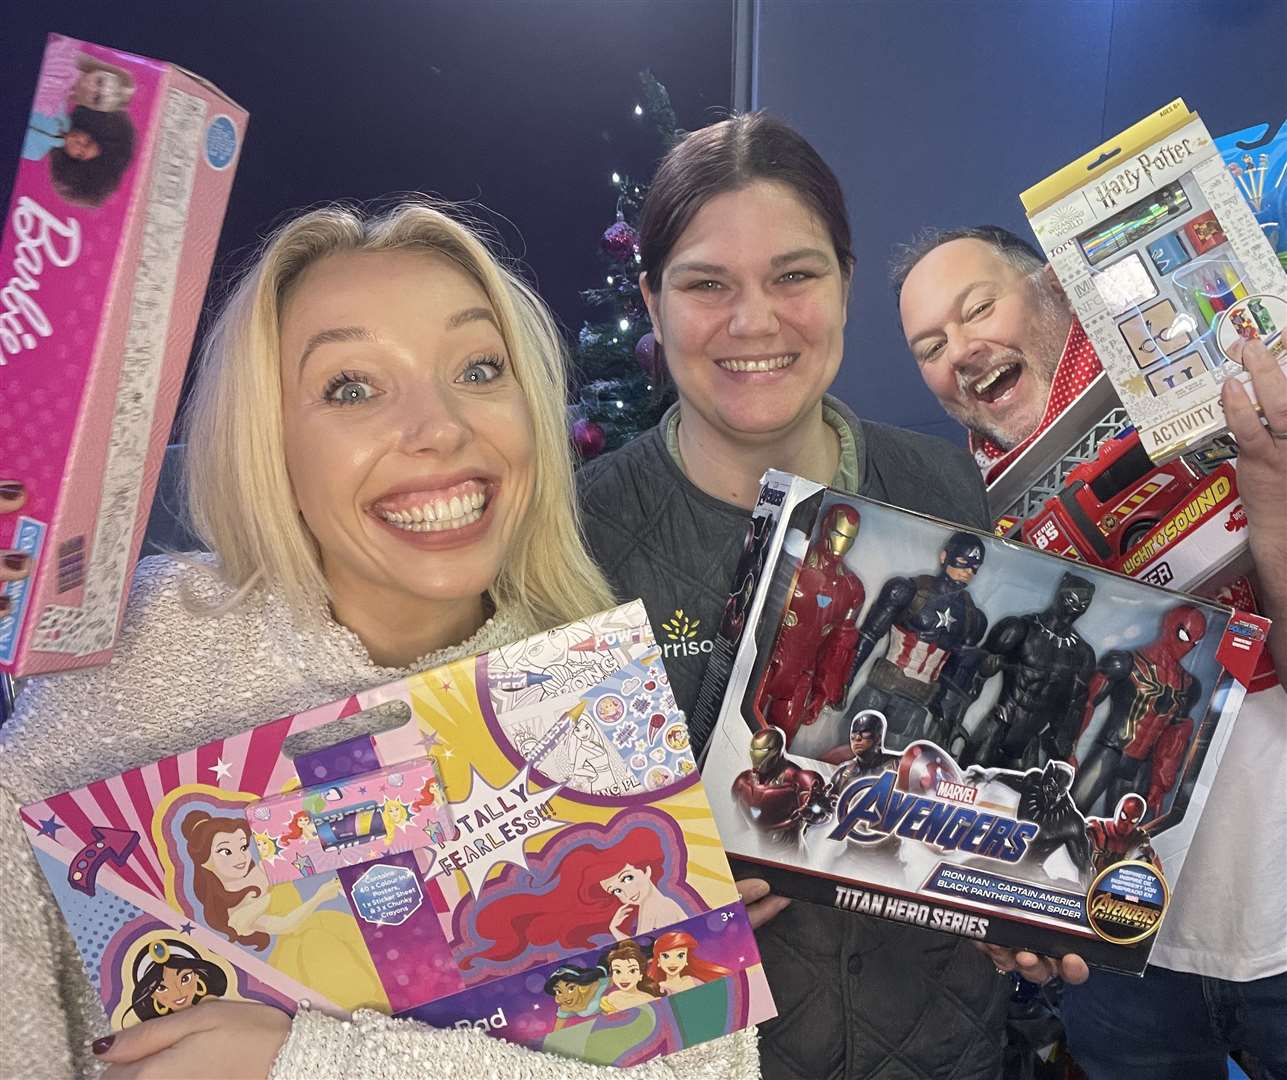 It was a toy bonanza in the studios of kmfm when Katy Clements, community champion of Morrisons' Larkfield store, paid a visit to see breakfast show presenters Garry Wilson and Chelsea Little